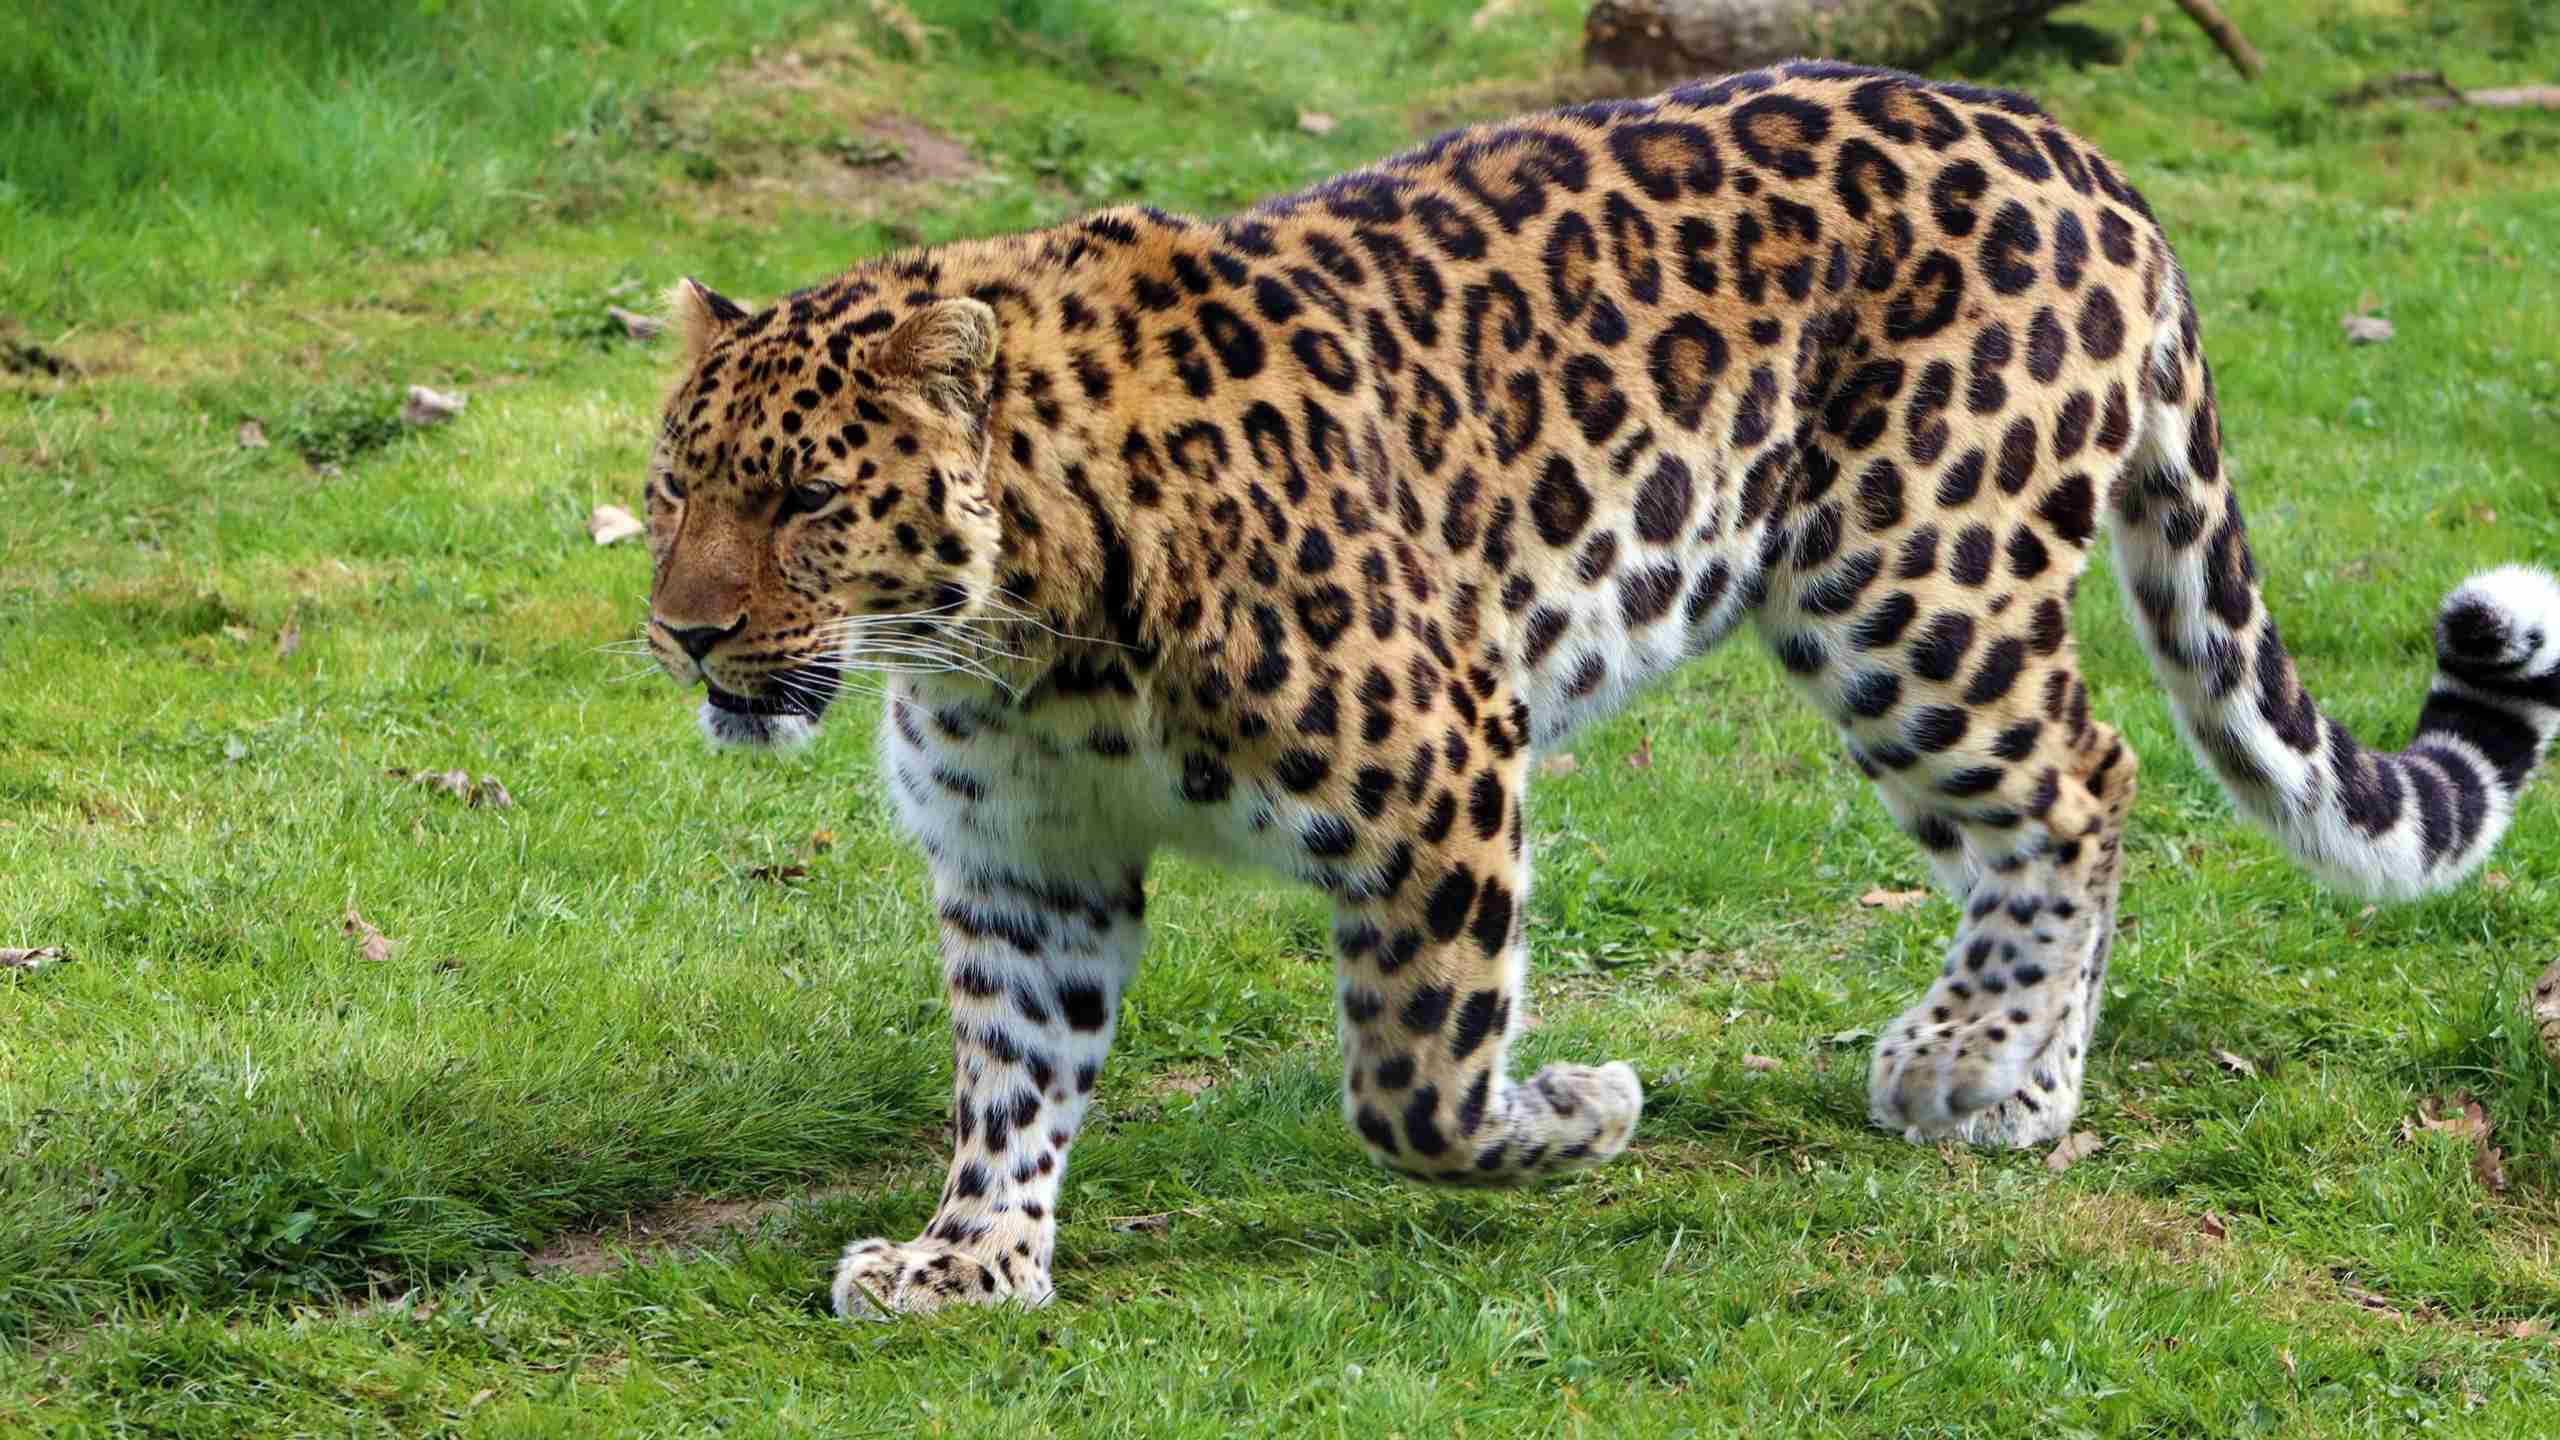 Leopard Amazing Facts